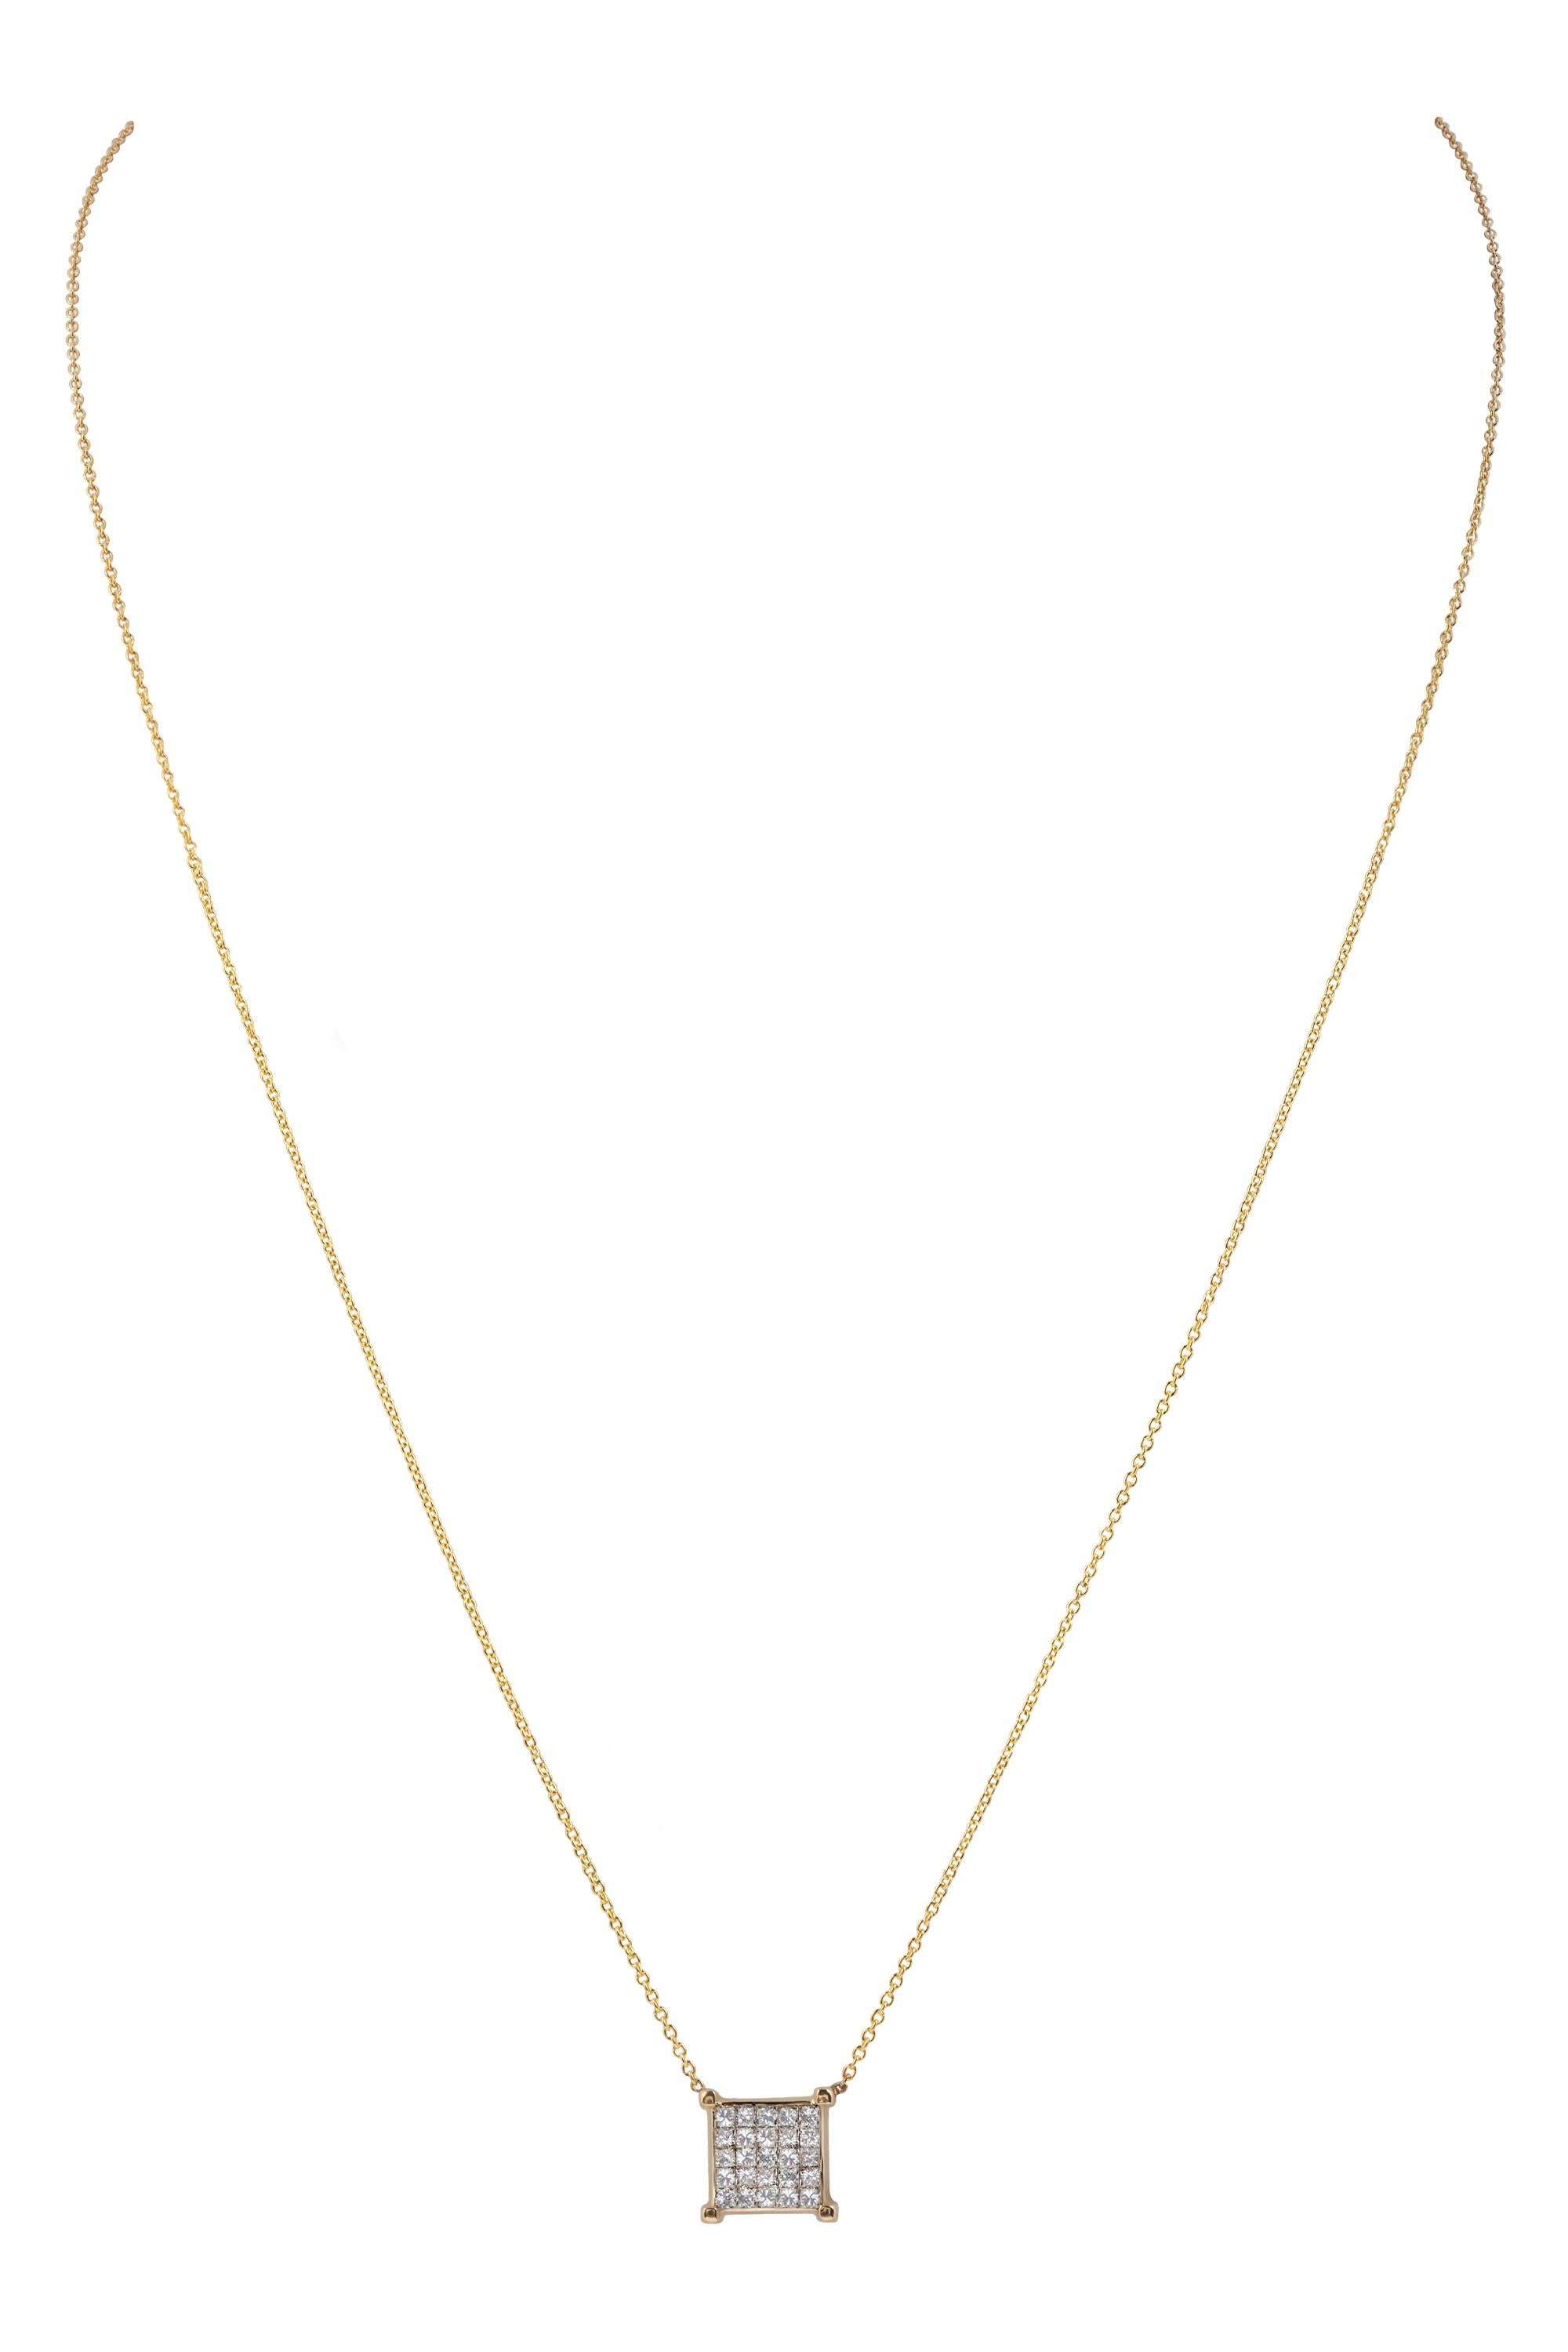 A sleek gold frame borders a perfect square of radiant invisibly set princess cut diamonds in this chic and elegant 14 karat yellow gold pendant necklace. Set with twenty-five princess cut diamonds G in color, VS in clarity, weighing approximately